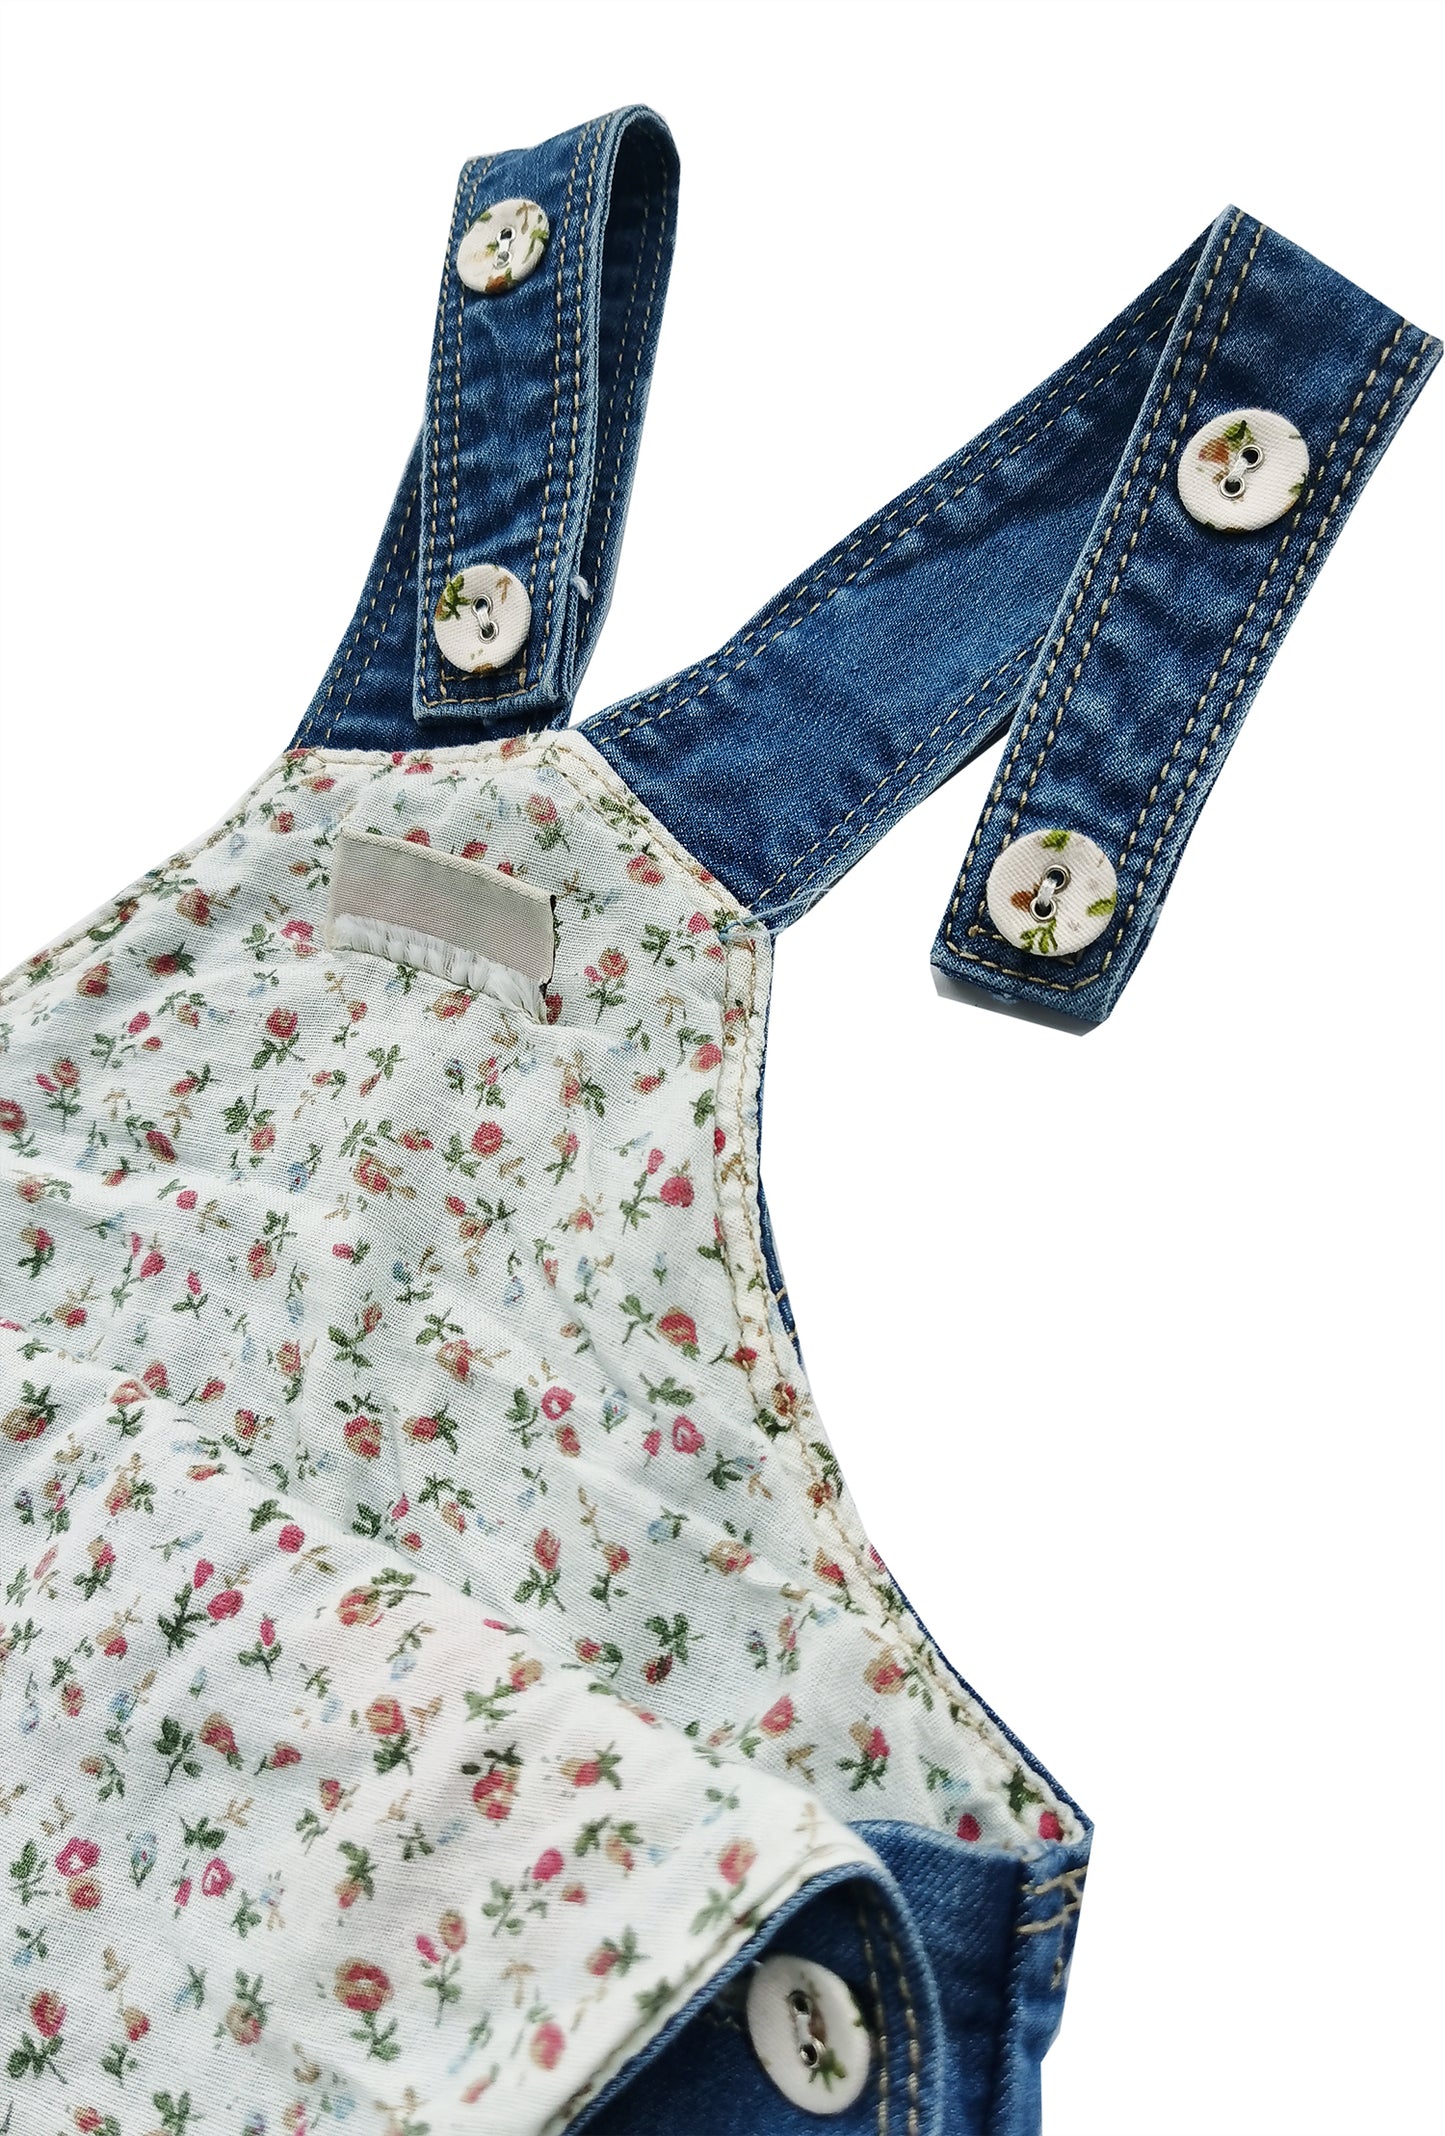 Baby Embroidered Fashion Infant Jeans Overalls